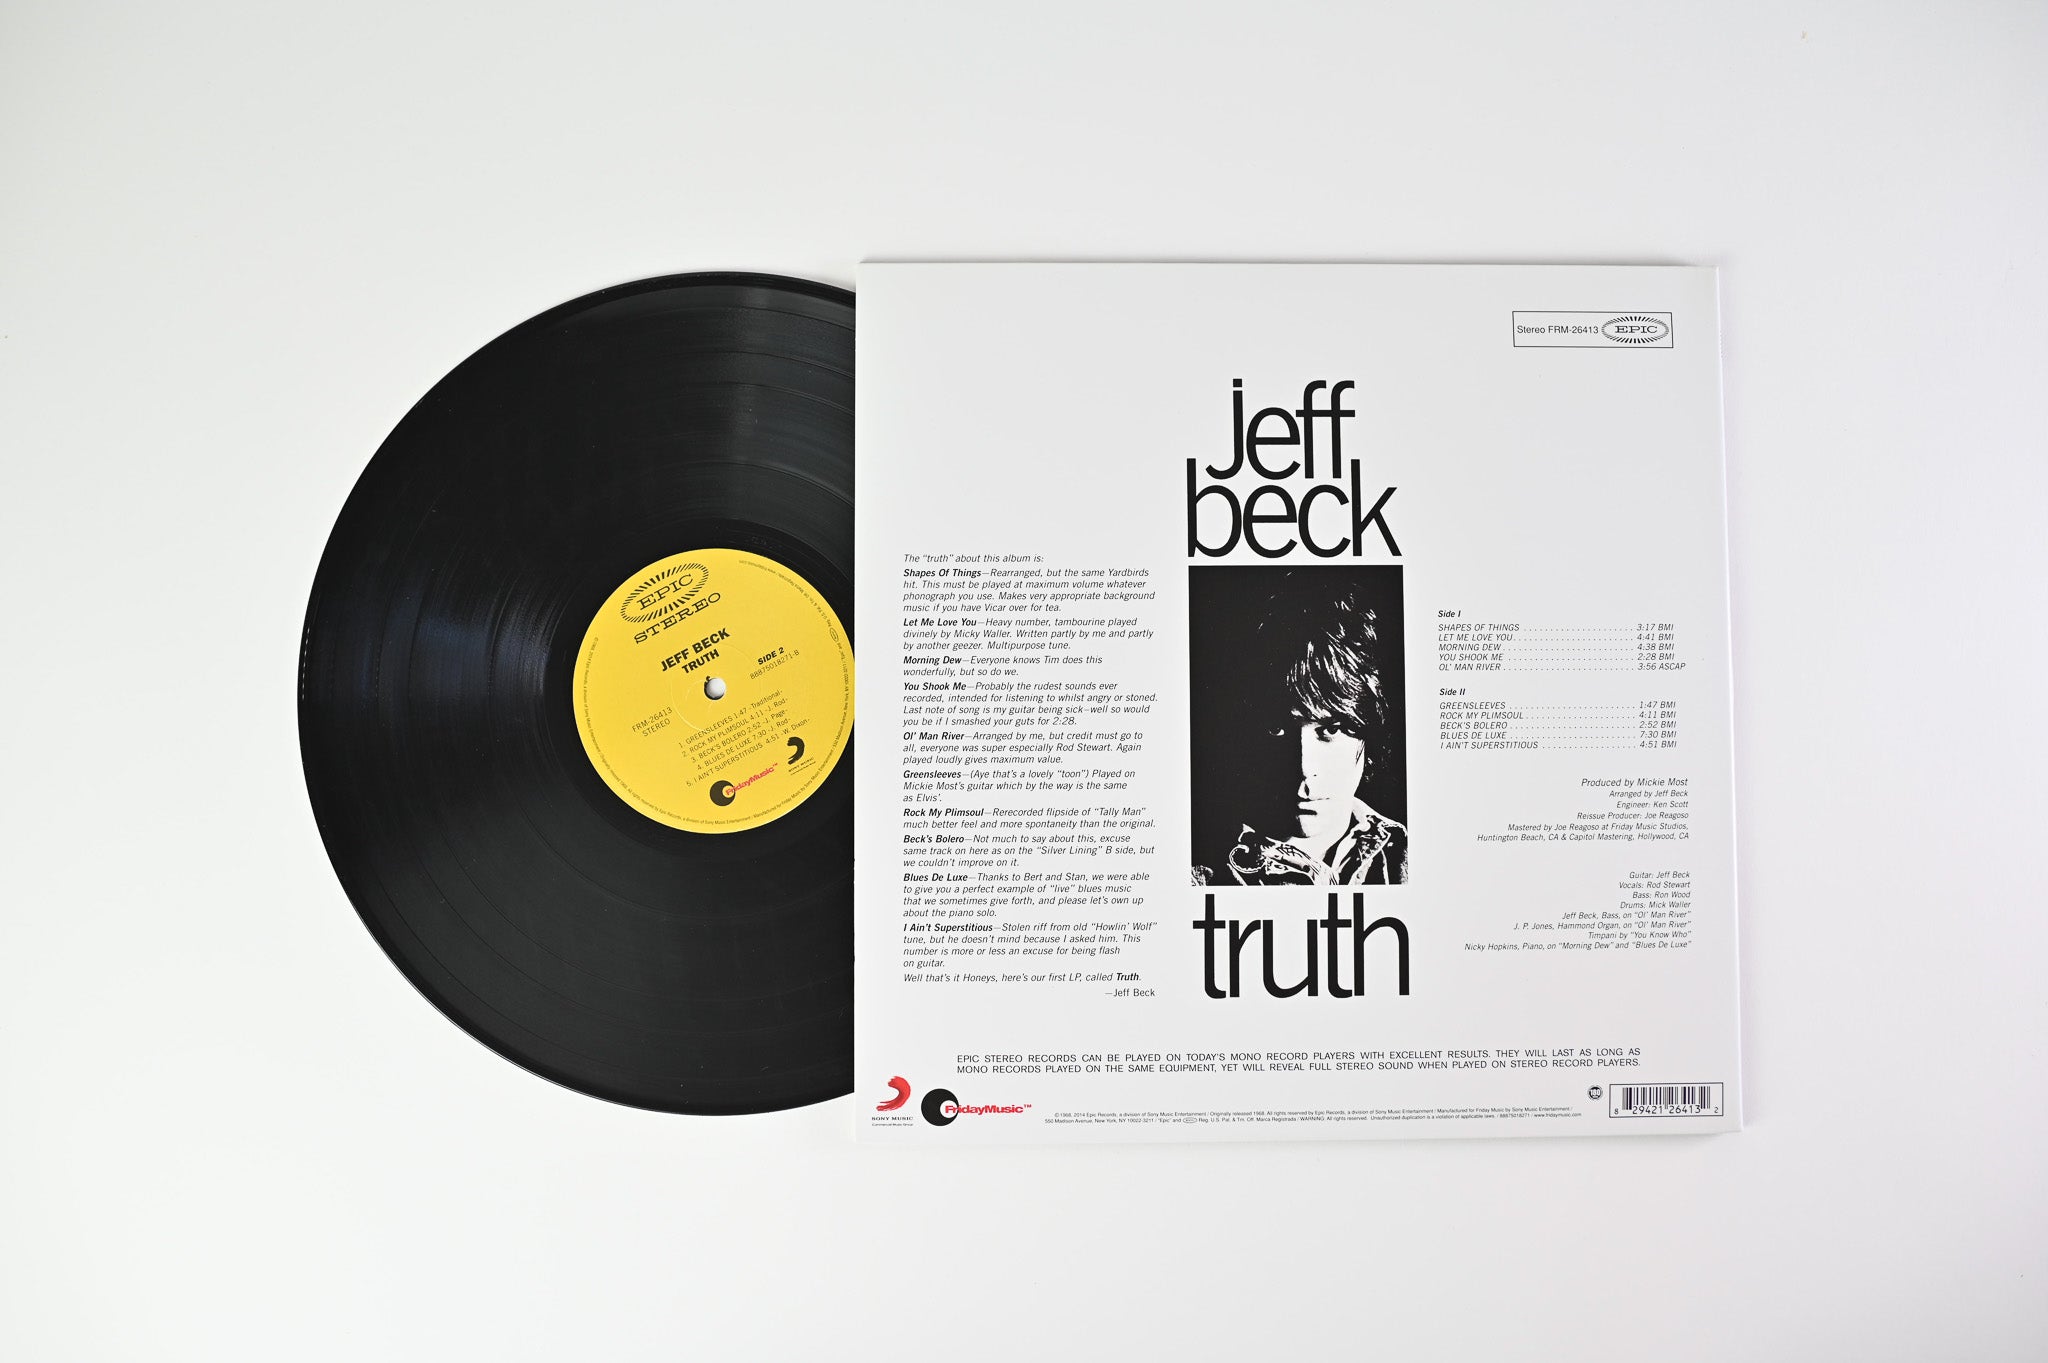 Jeff Beck - Truth on Friday Music/Epic Reissue